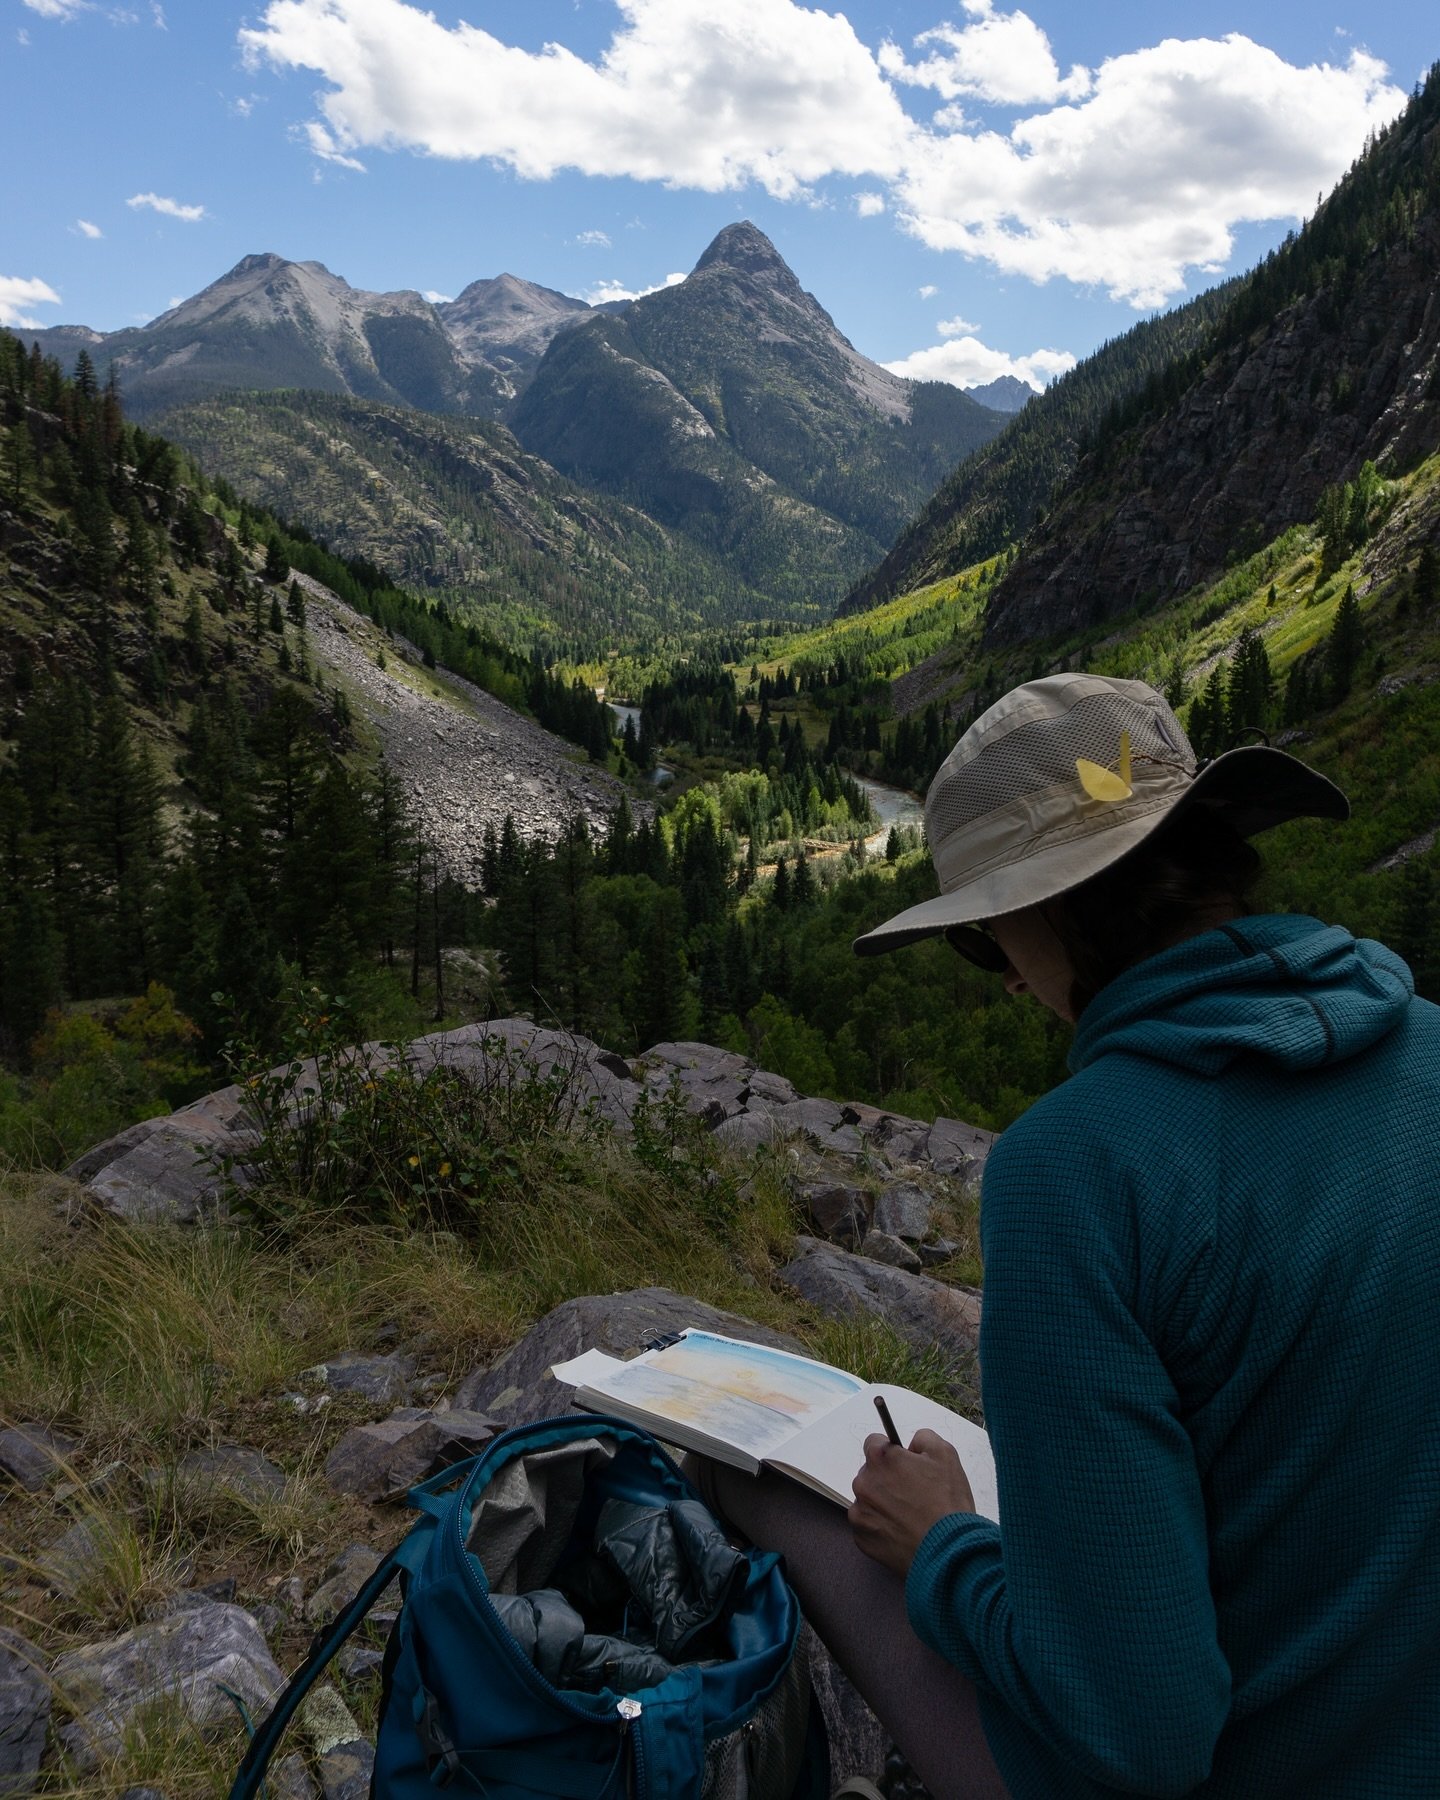 I can&rsquo;t wait to paint in the mountains again this summer! 

TBH I&rsquo;m pretty terrible at painting plein air, but maybe that has something to do with the fact that I hardly ever do it? 🤔 I&rsquo;m determined to go more frequently and get be